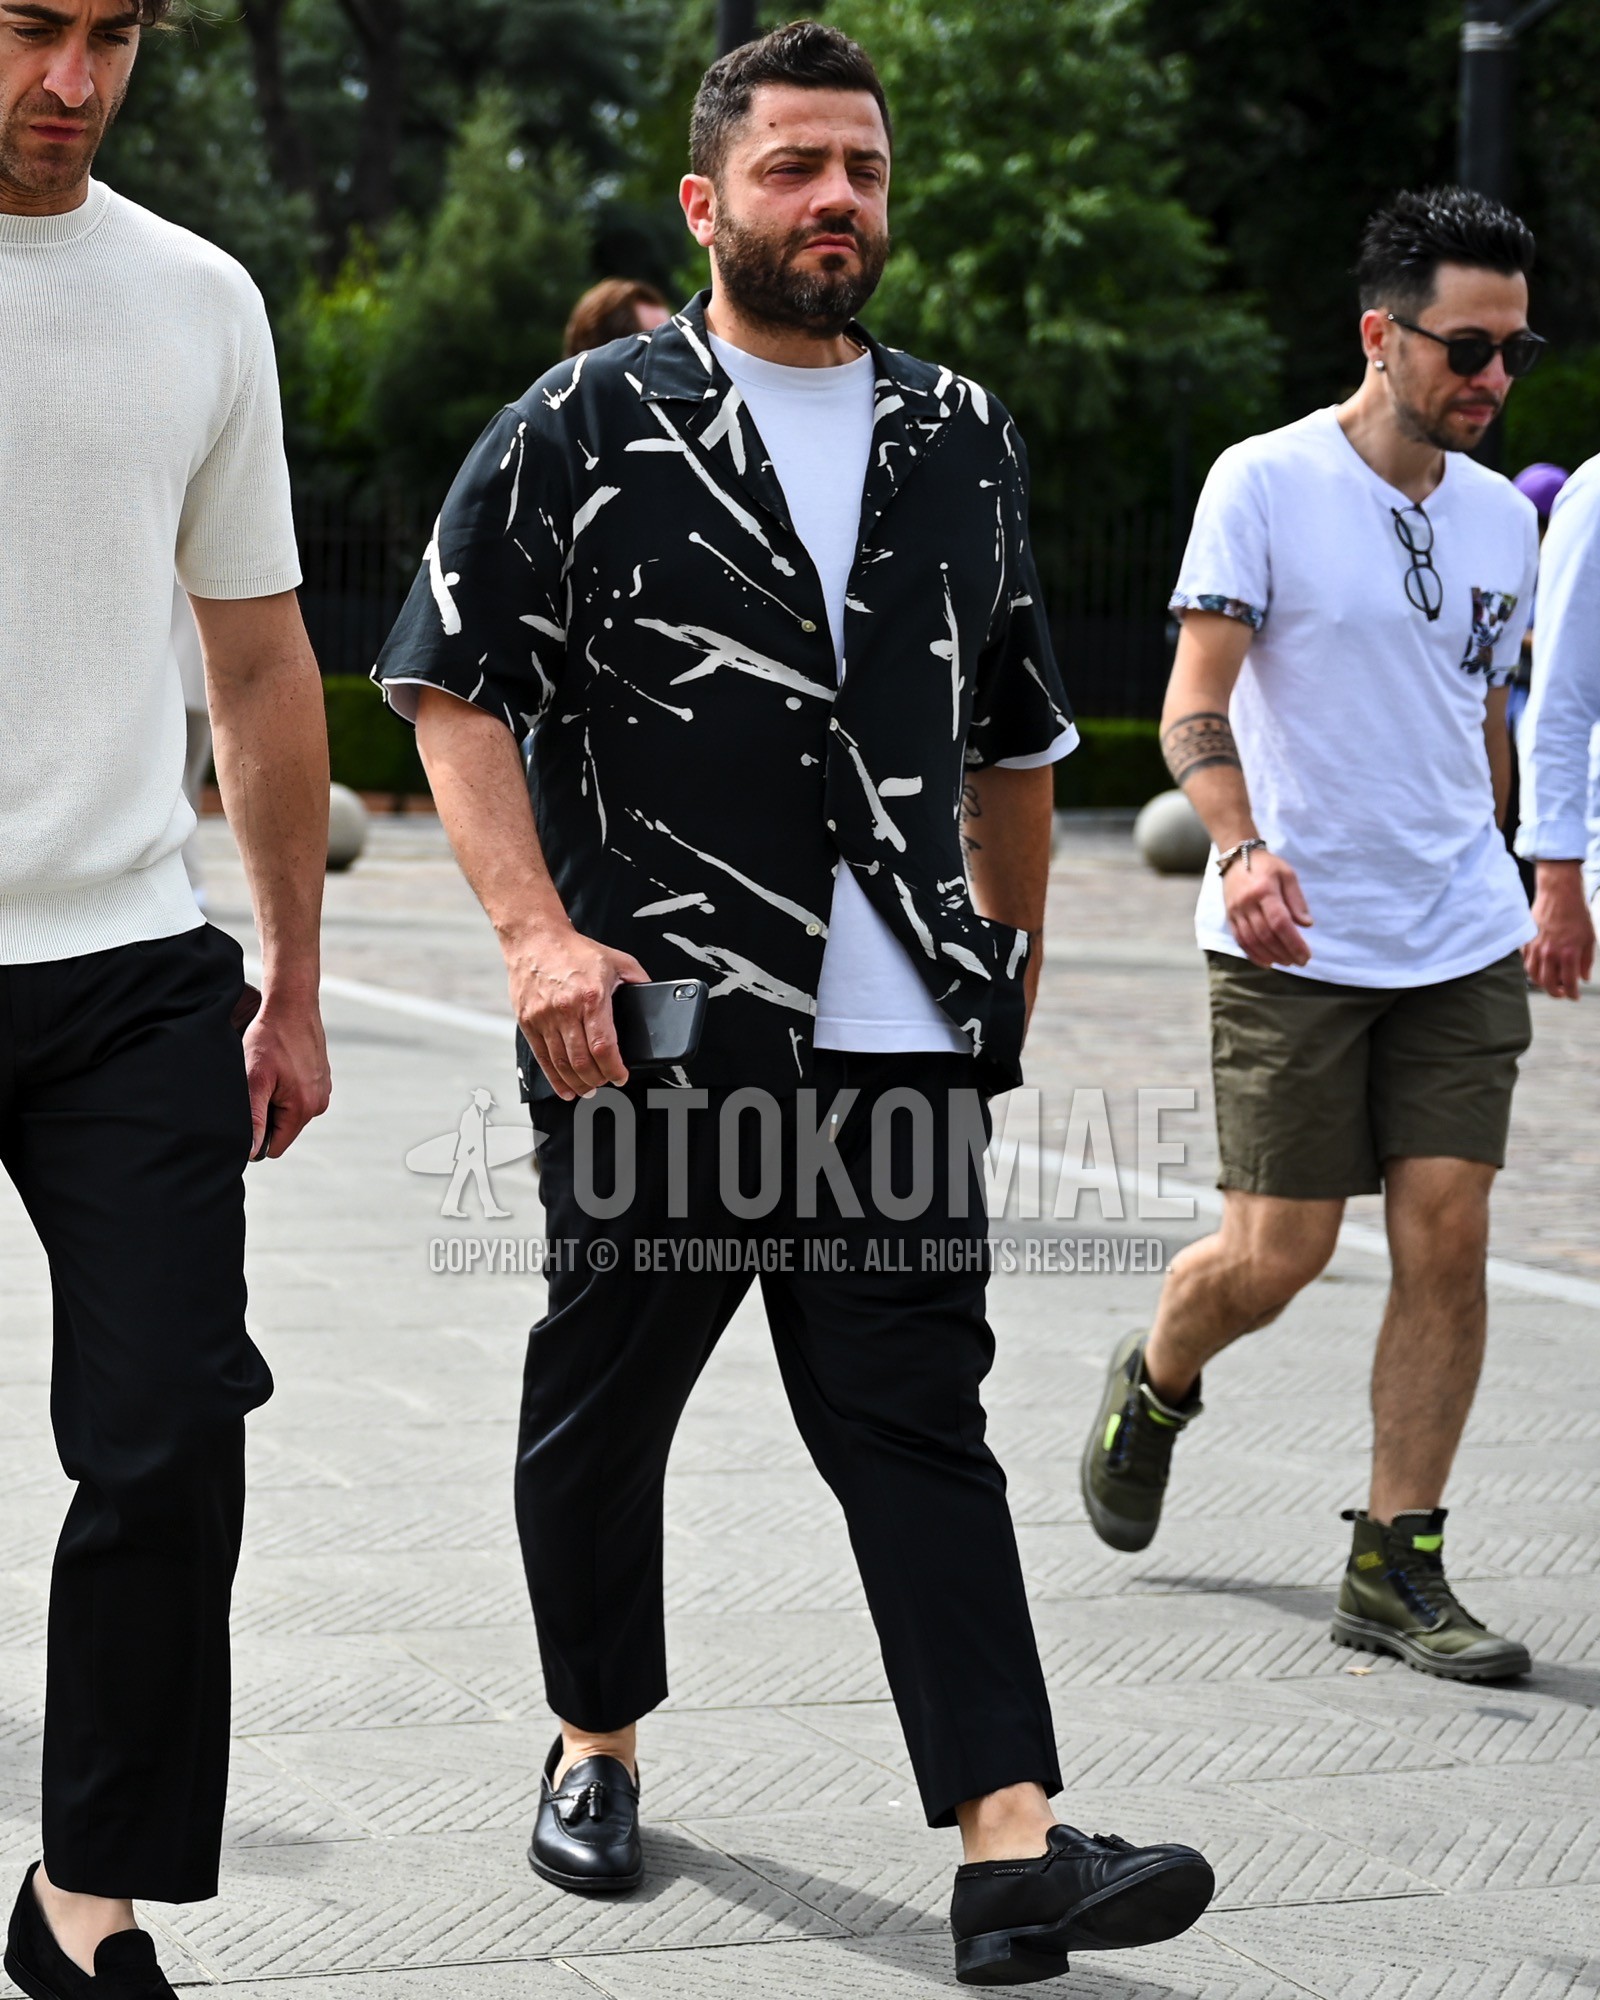 Men's spring summer outfit with black whole pattern shirt, white plain t-shirt, black plain easy pants, black tassel loafers leather shoes.